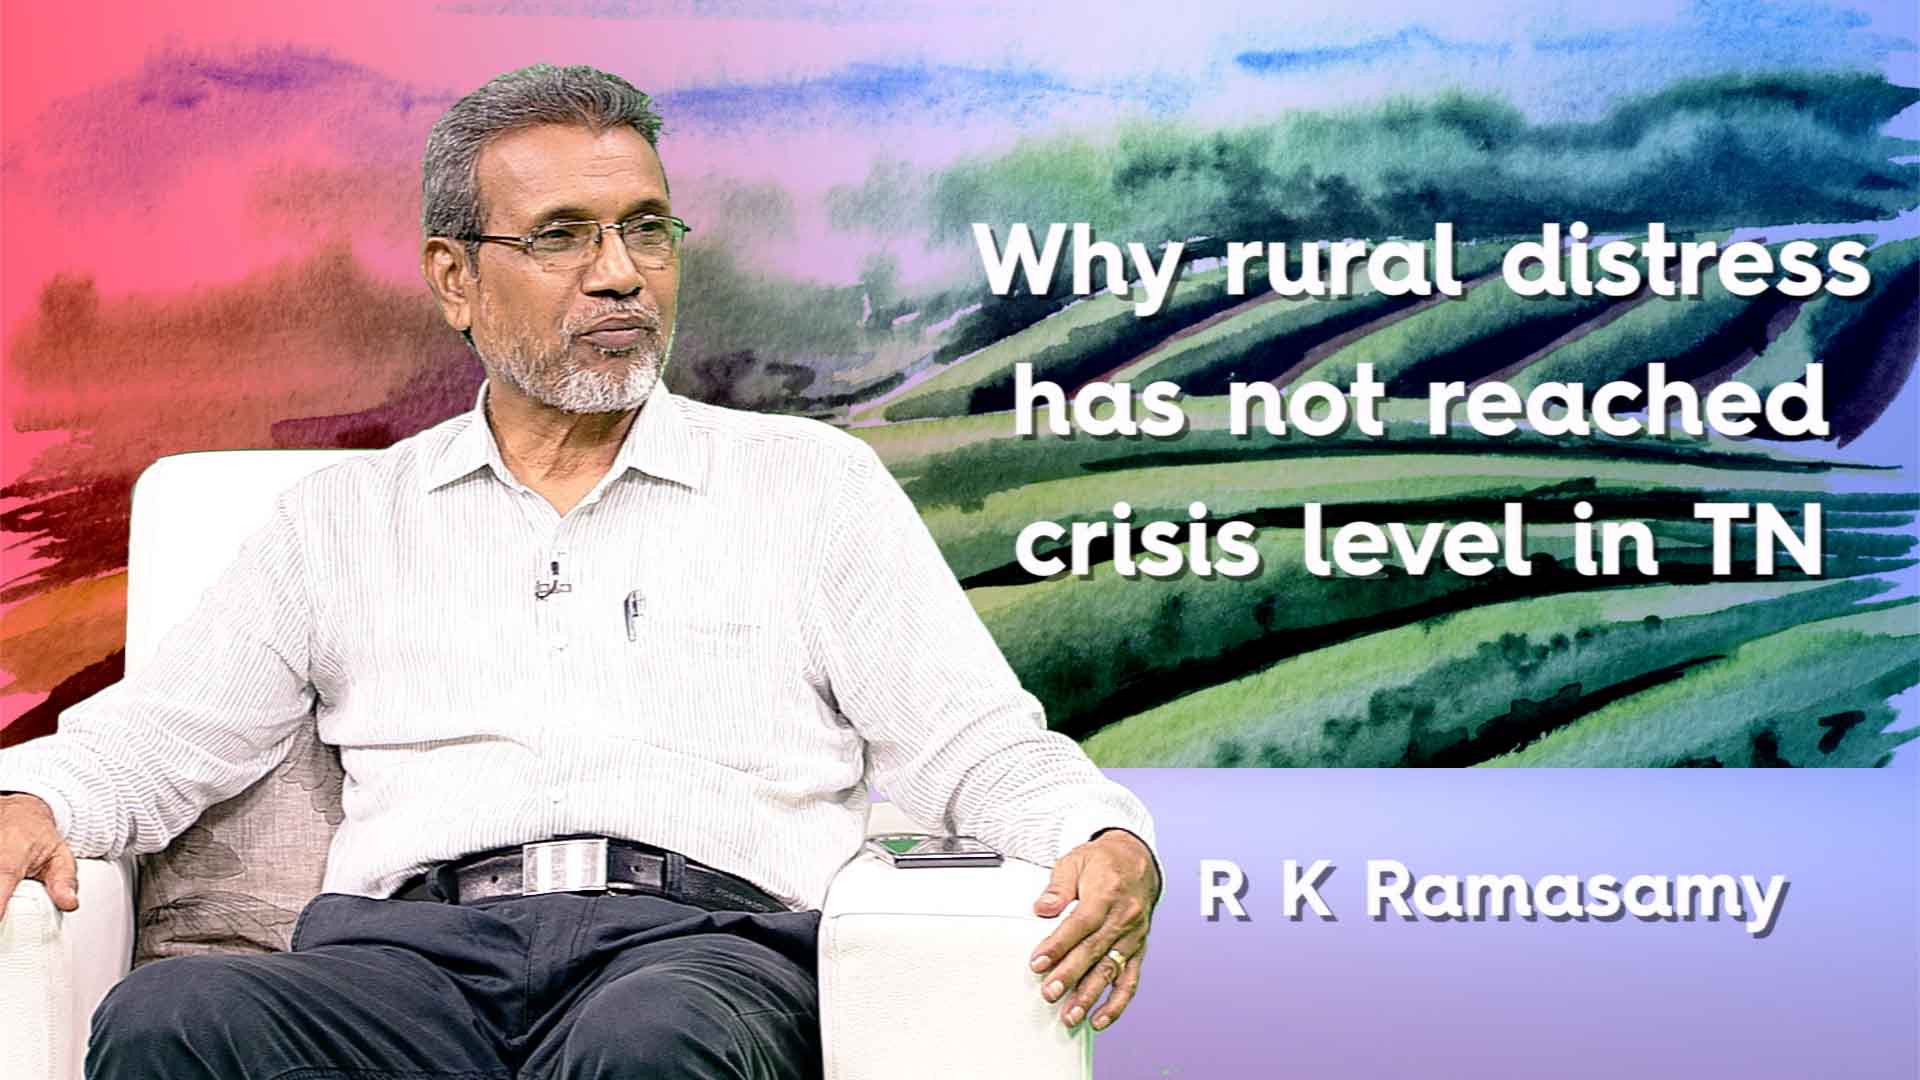 Why rural distress has not reached crisis level in Tamil Nadu